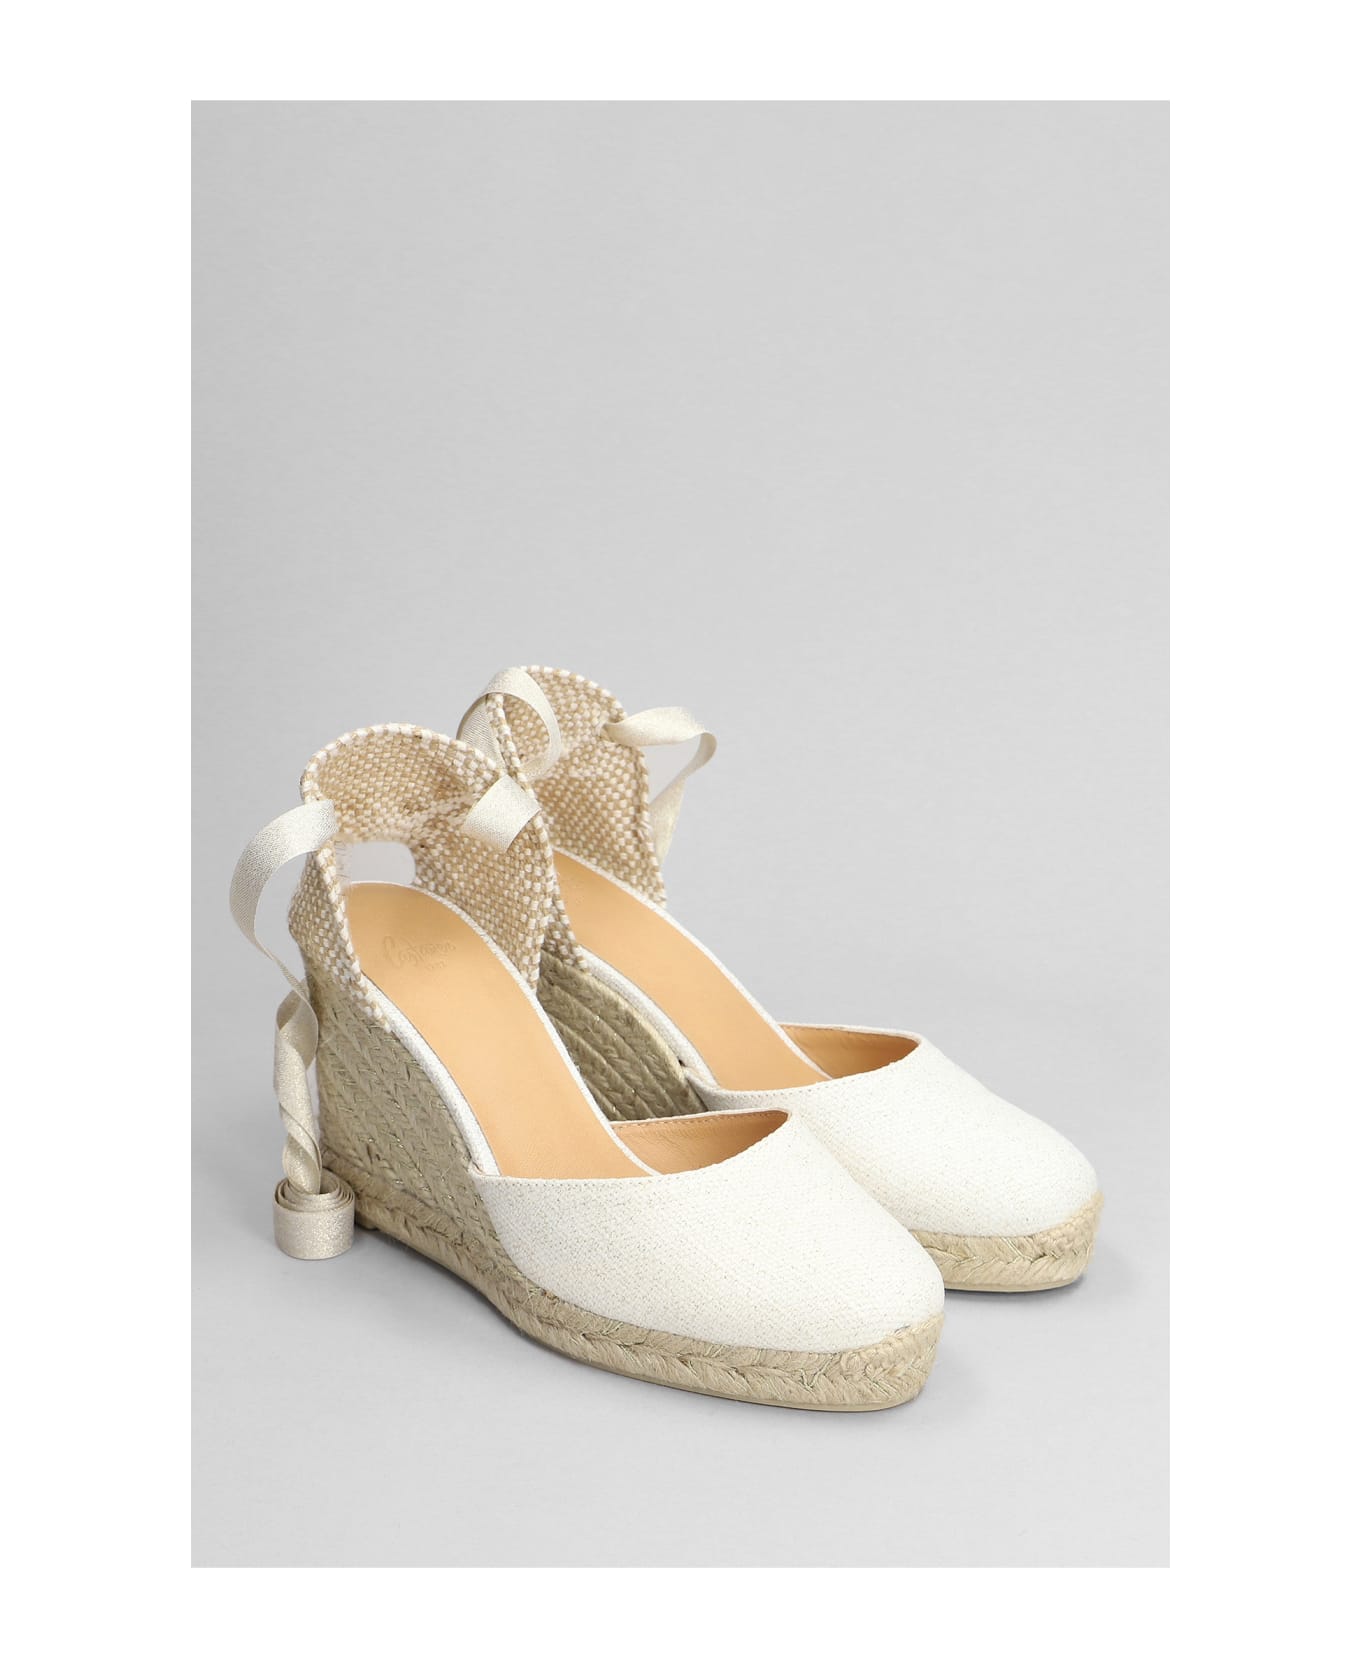 Castañer Carina-8-032 Wedges In White Canvas - white